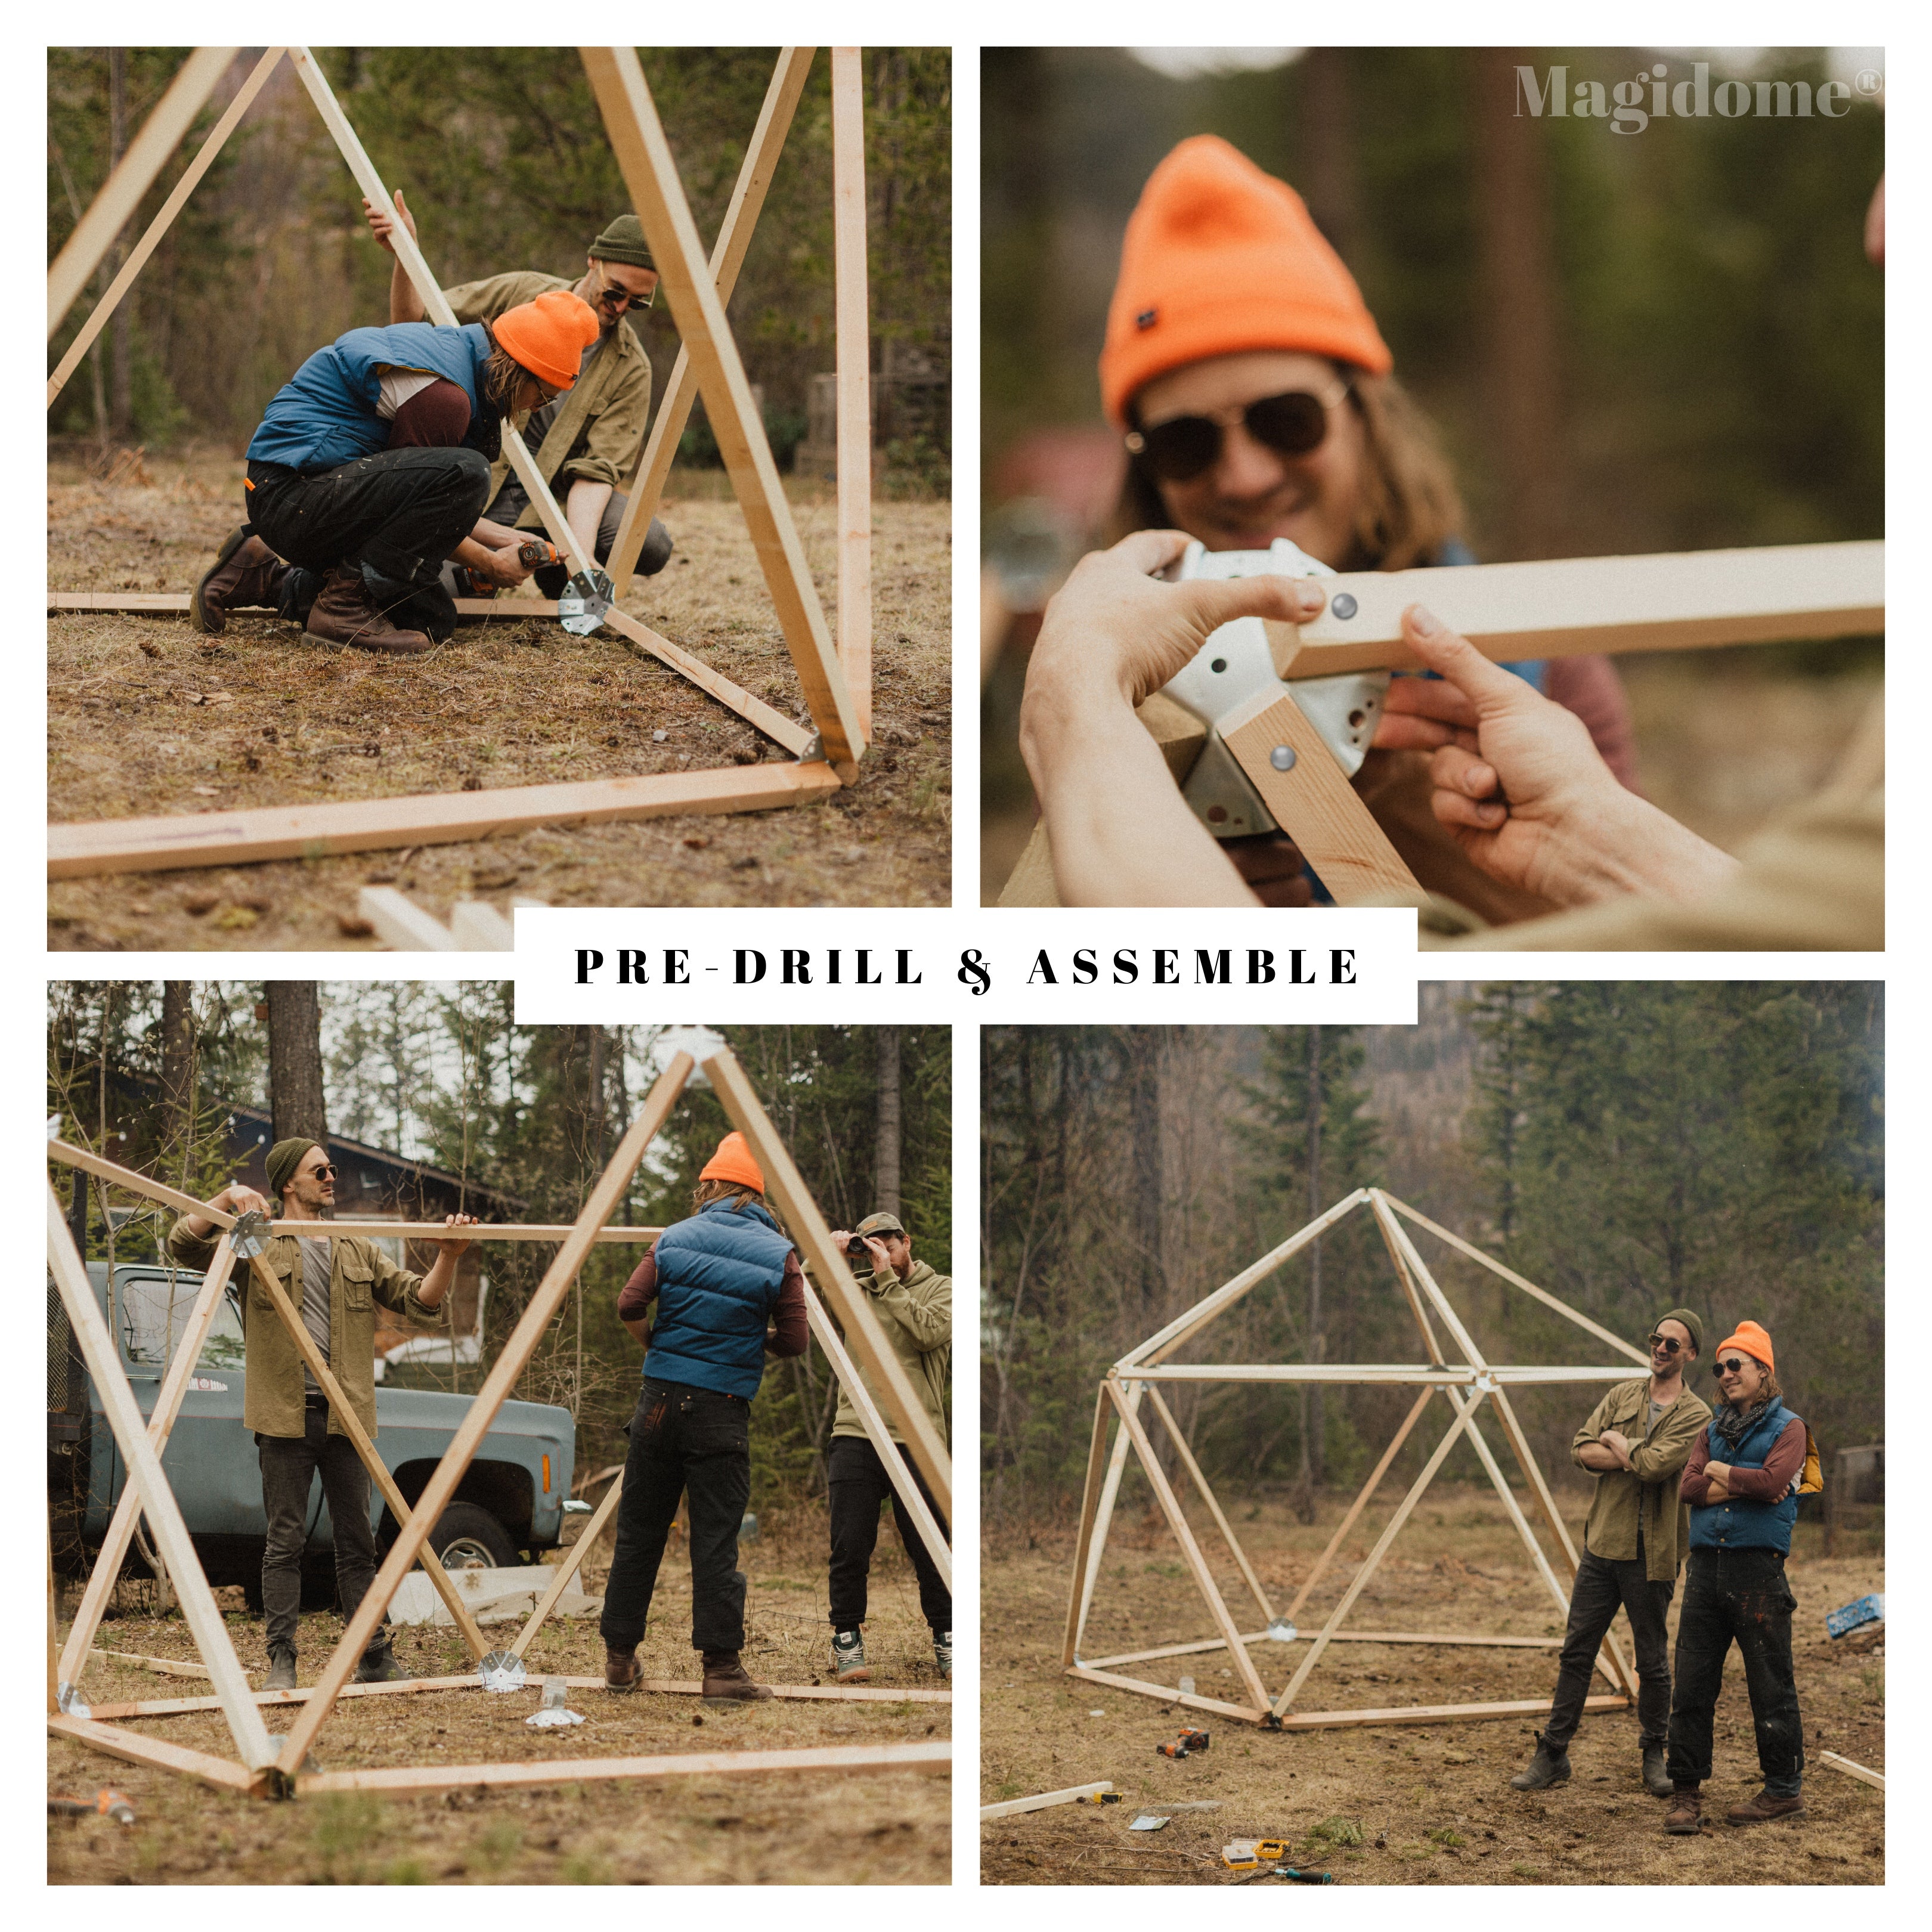 Magidome Geodesic Dome Connectors make building a geodesic dome easy, fun and affordable. We set out to produce the best geodesic dome connectors to build a diy yurt, greenhouse, chicken coop, festival tent, hunting blind, trellis, gazebo, pergola, fort, shelter, shed, stage, meditation yoga dome!